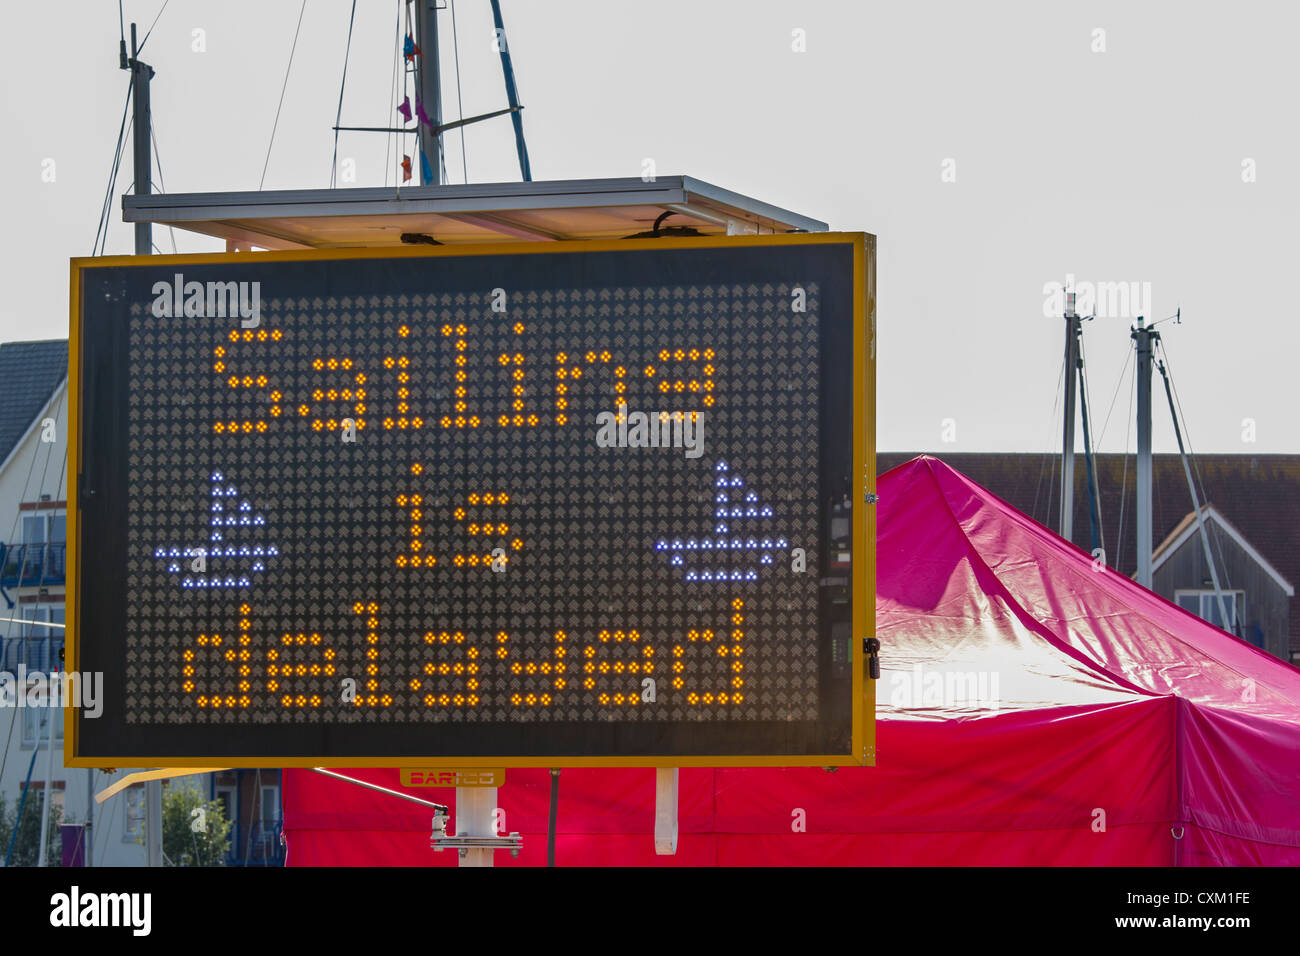 'Sailing is delayed' sign at 2012 Olympics in Weymouth - due to lack of wind. Stock Photo